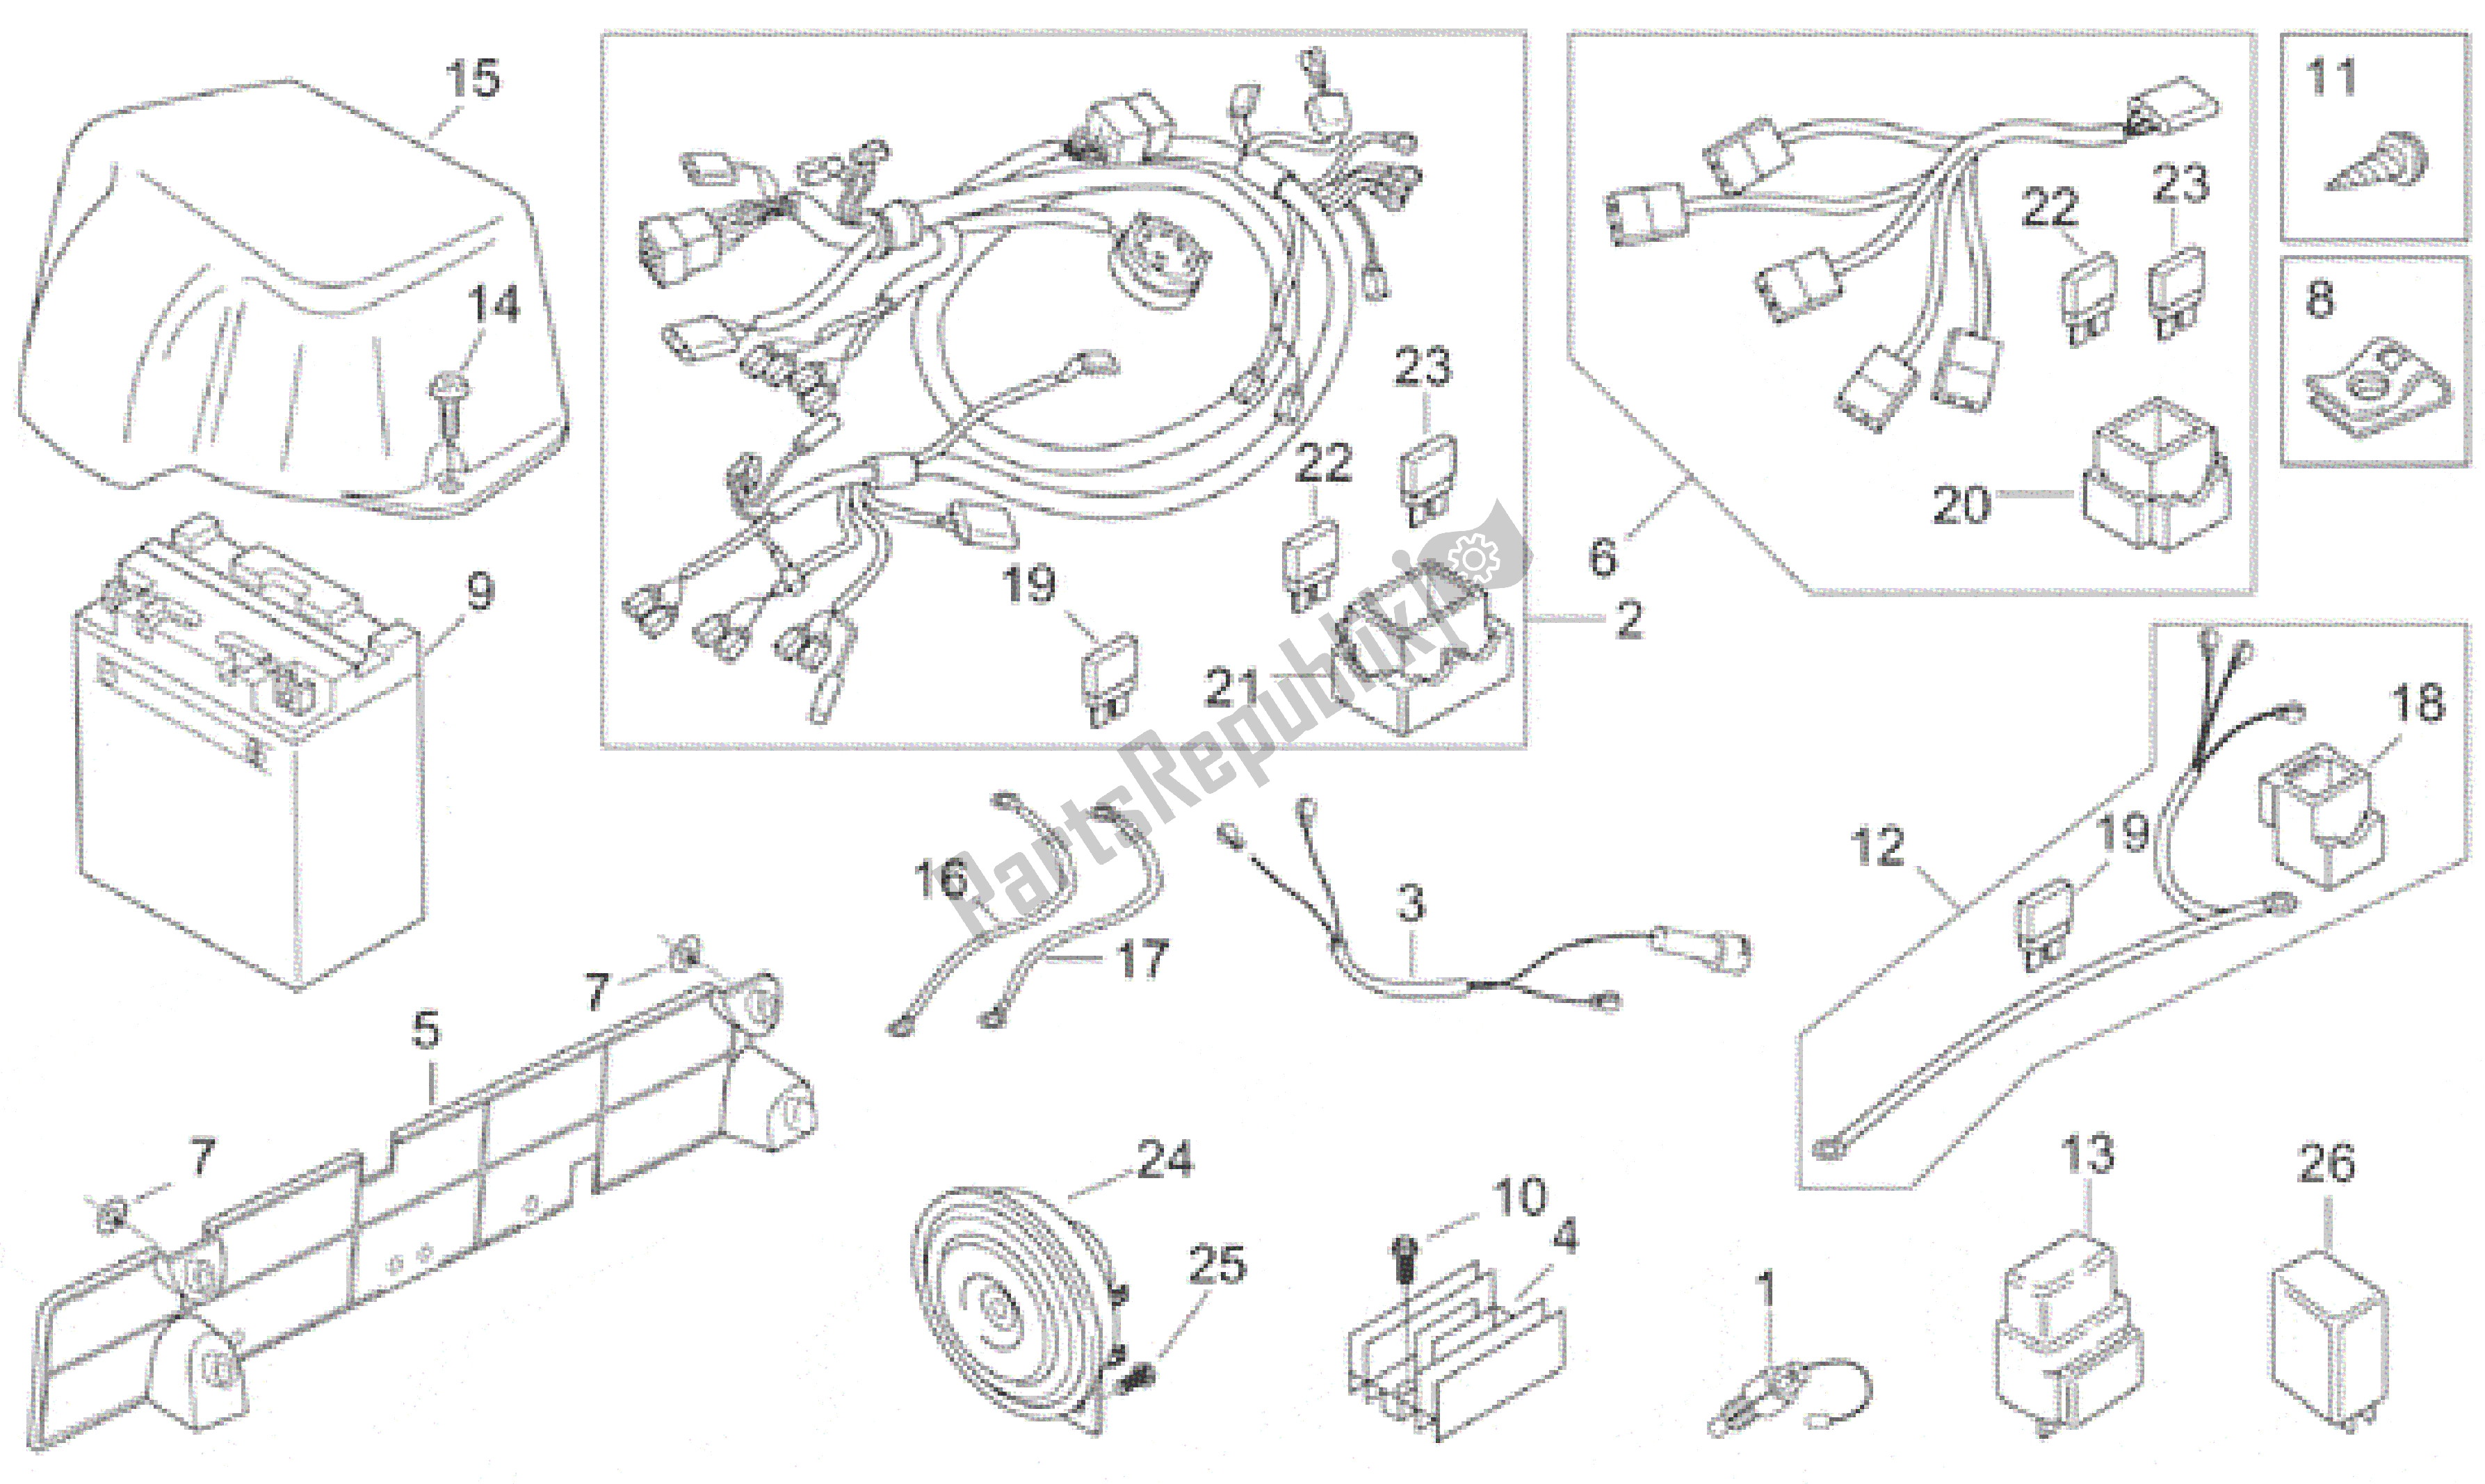 All parts for the Electrical System of the Aprilia Leonardo 125 1996 - 1998